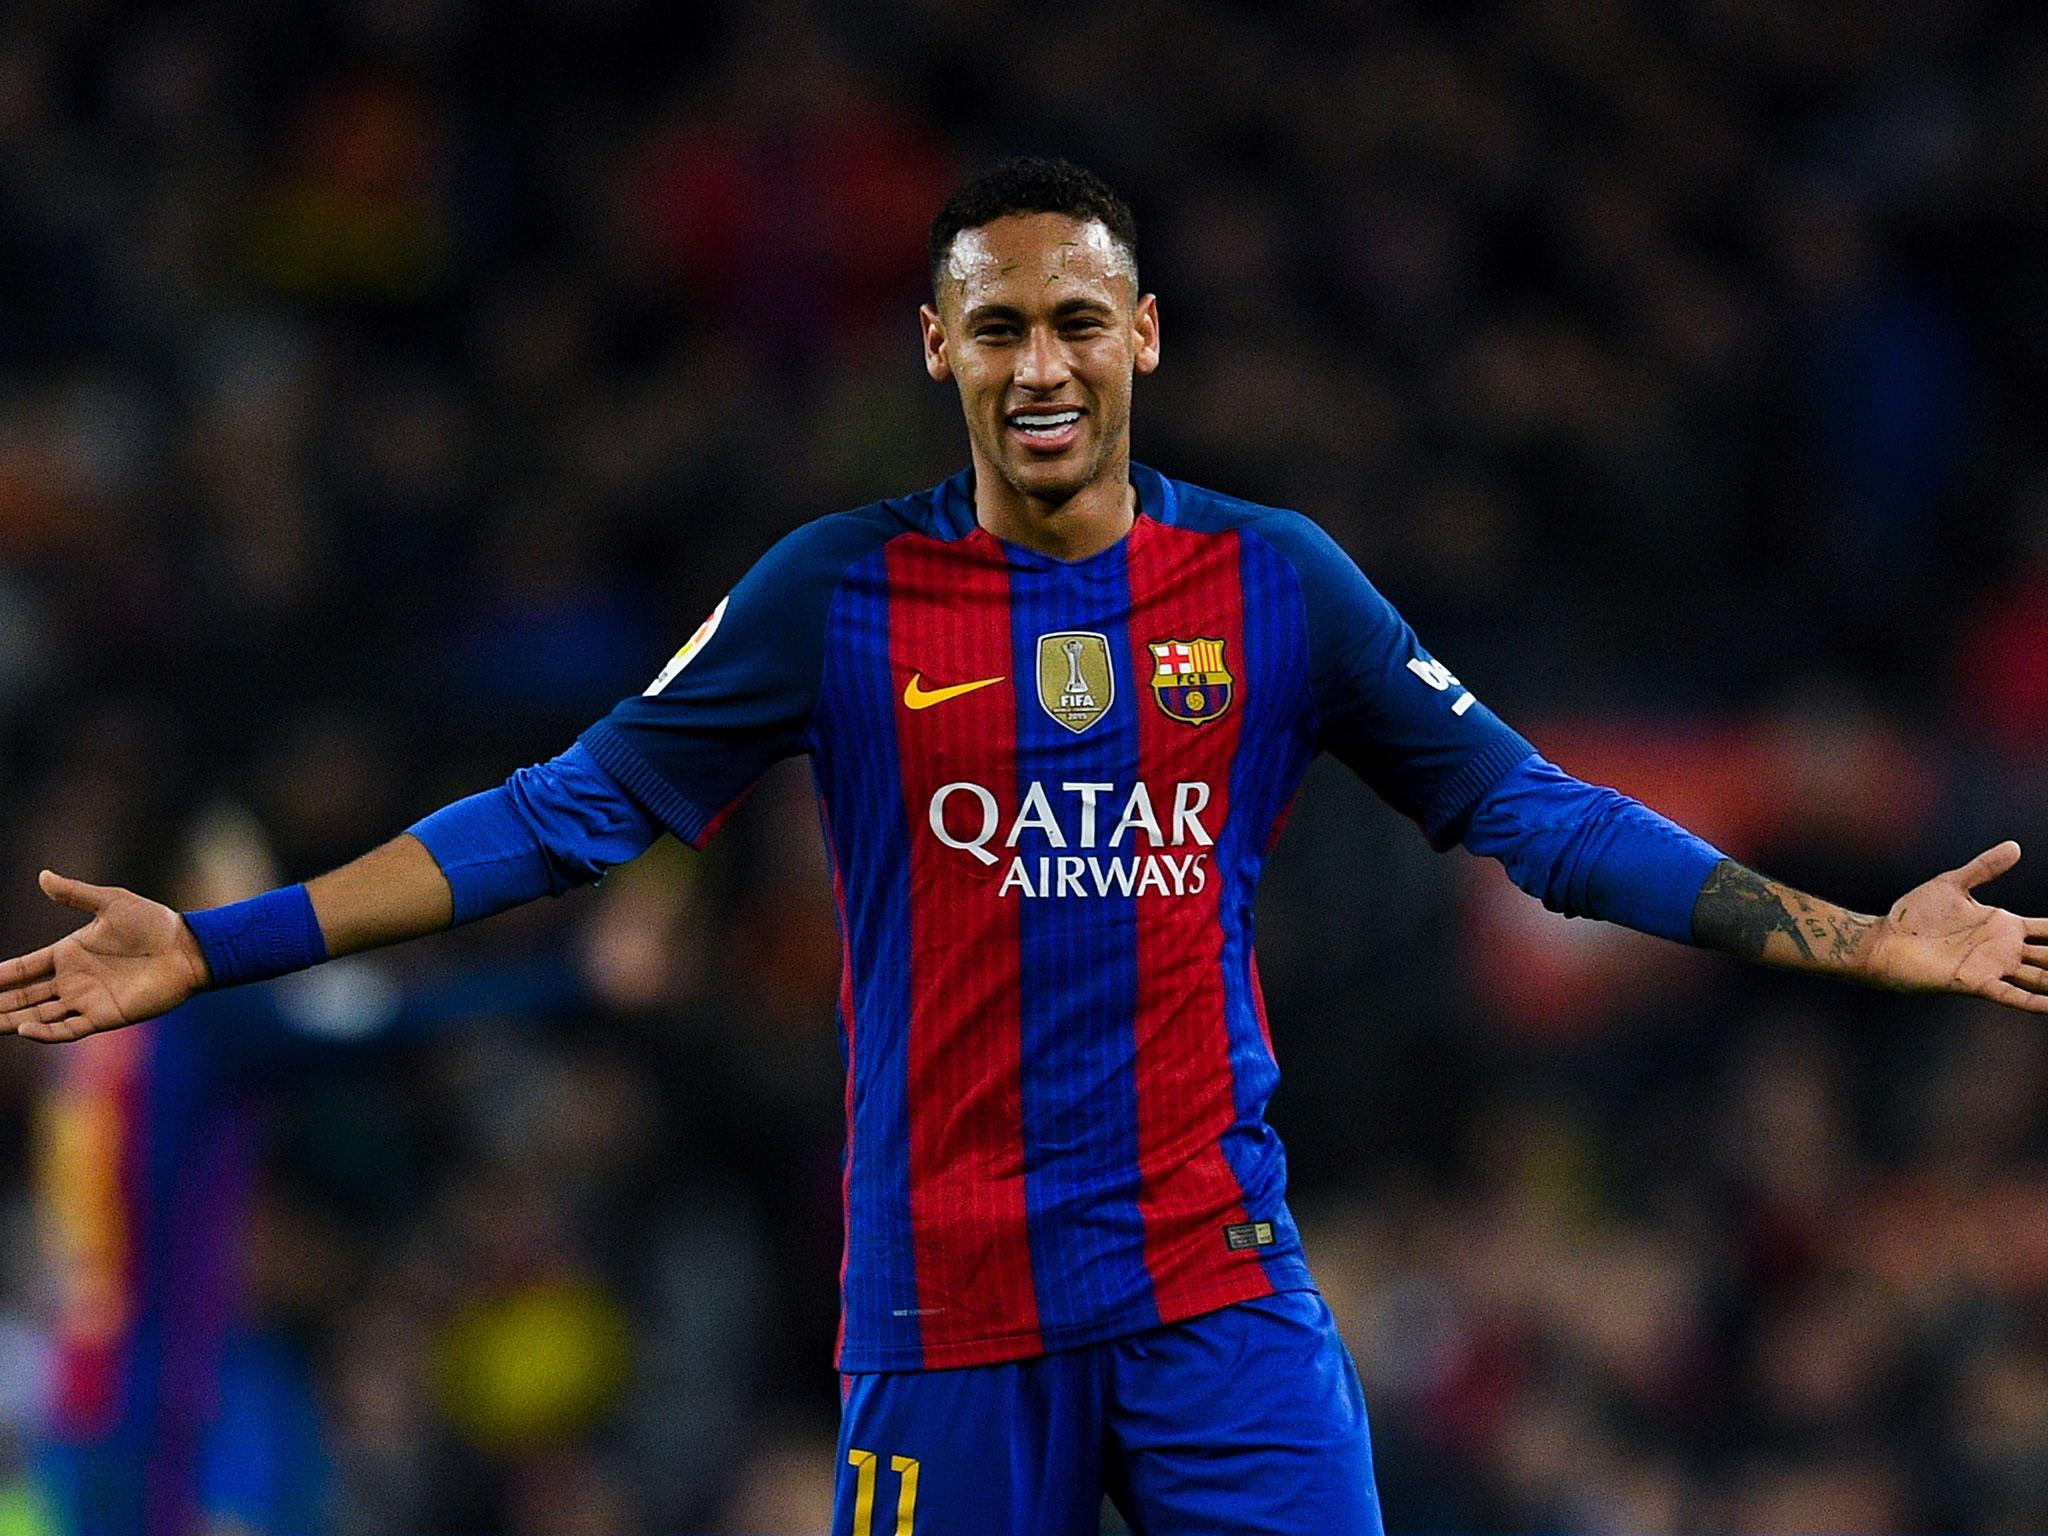 Neymar has become one of the world's best players at Barcelona